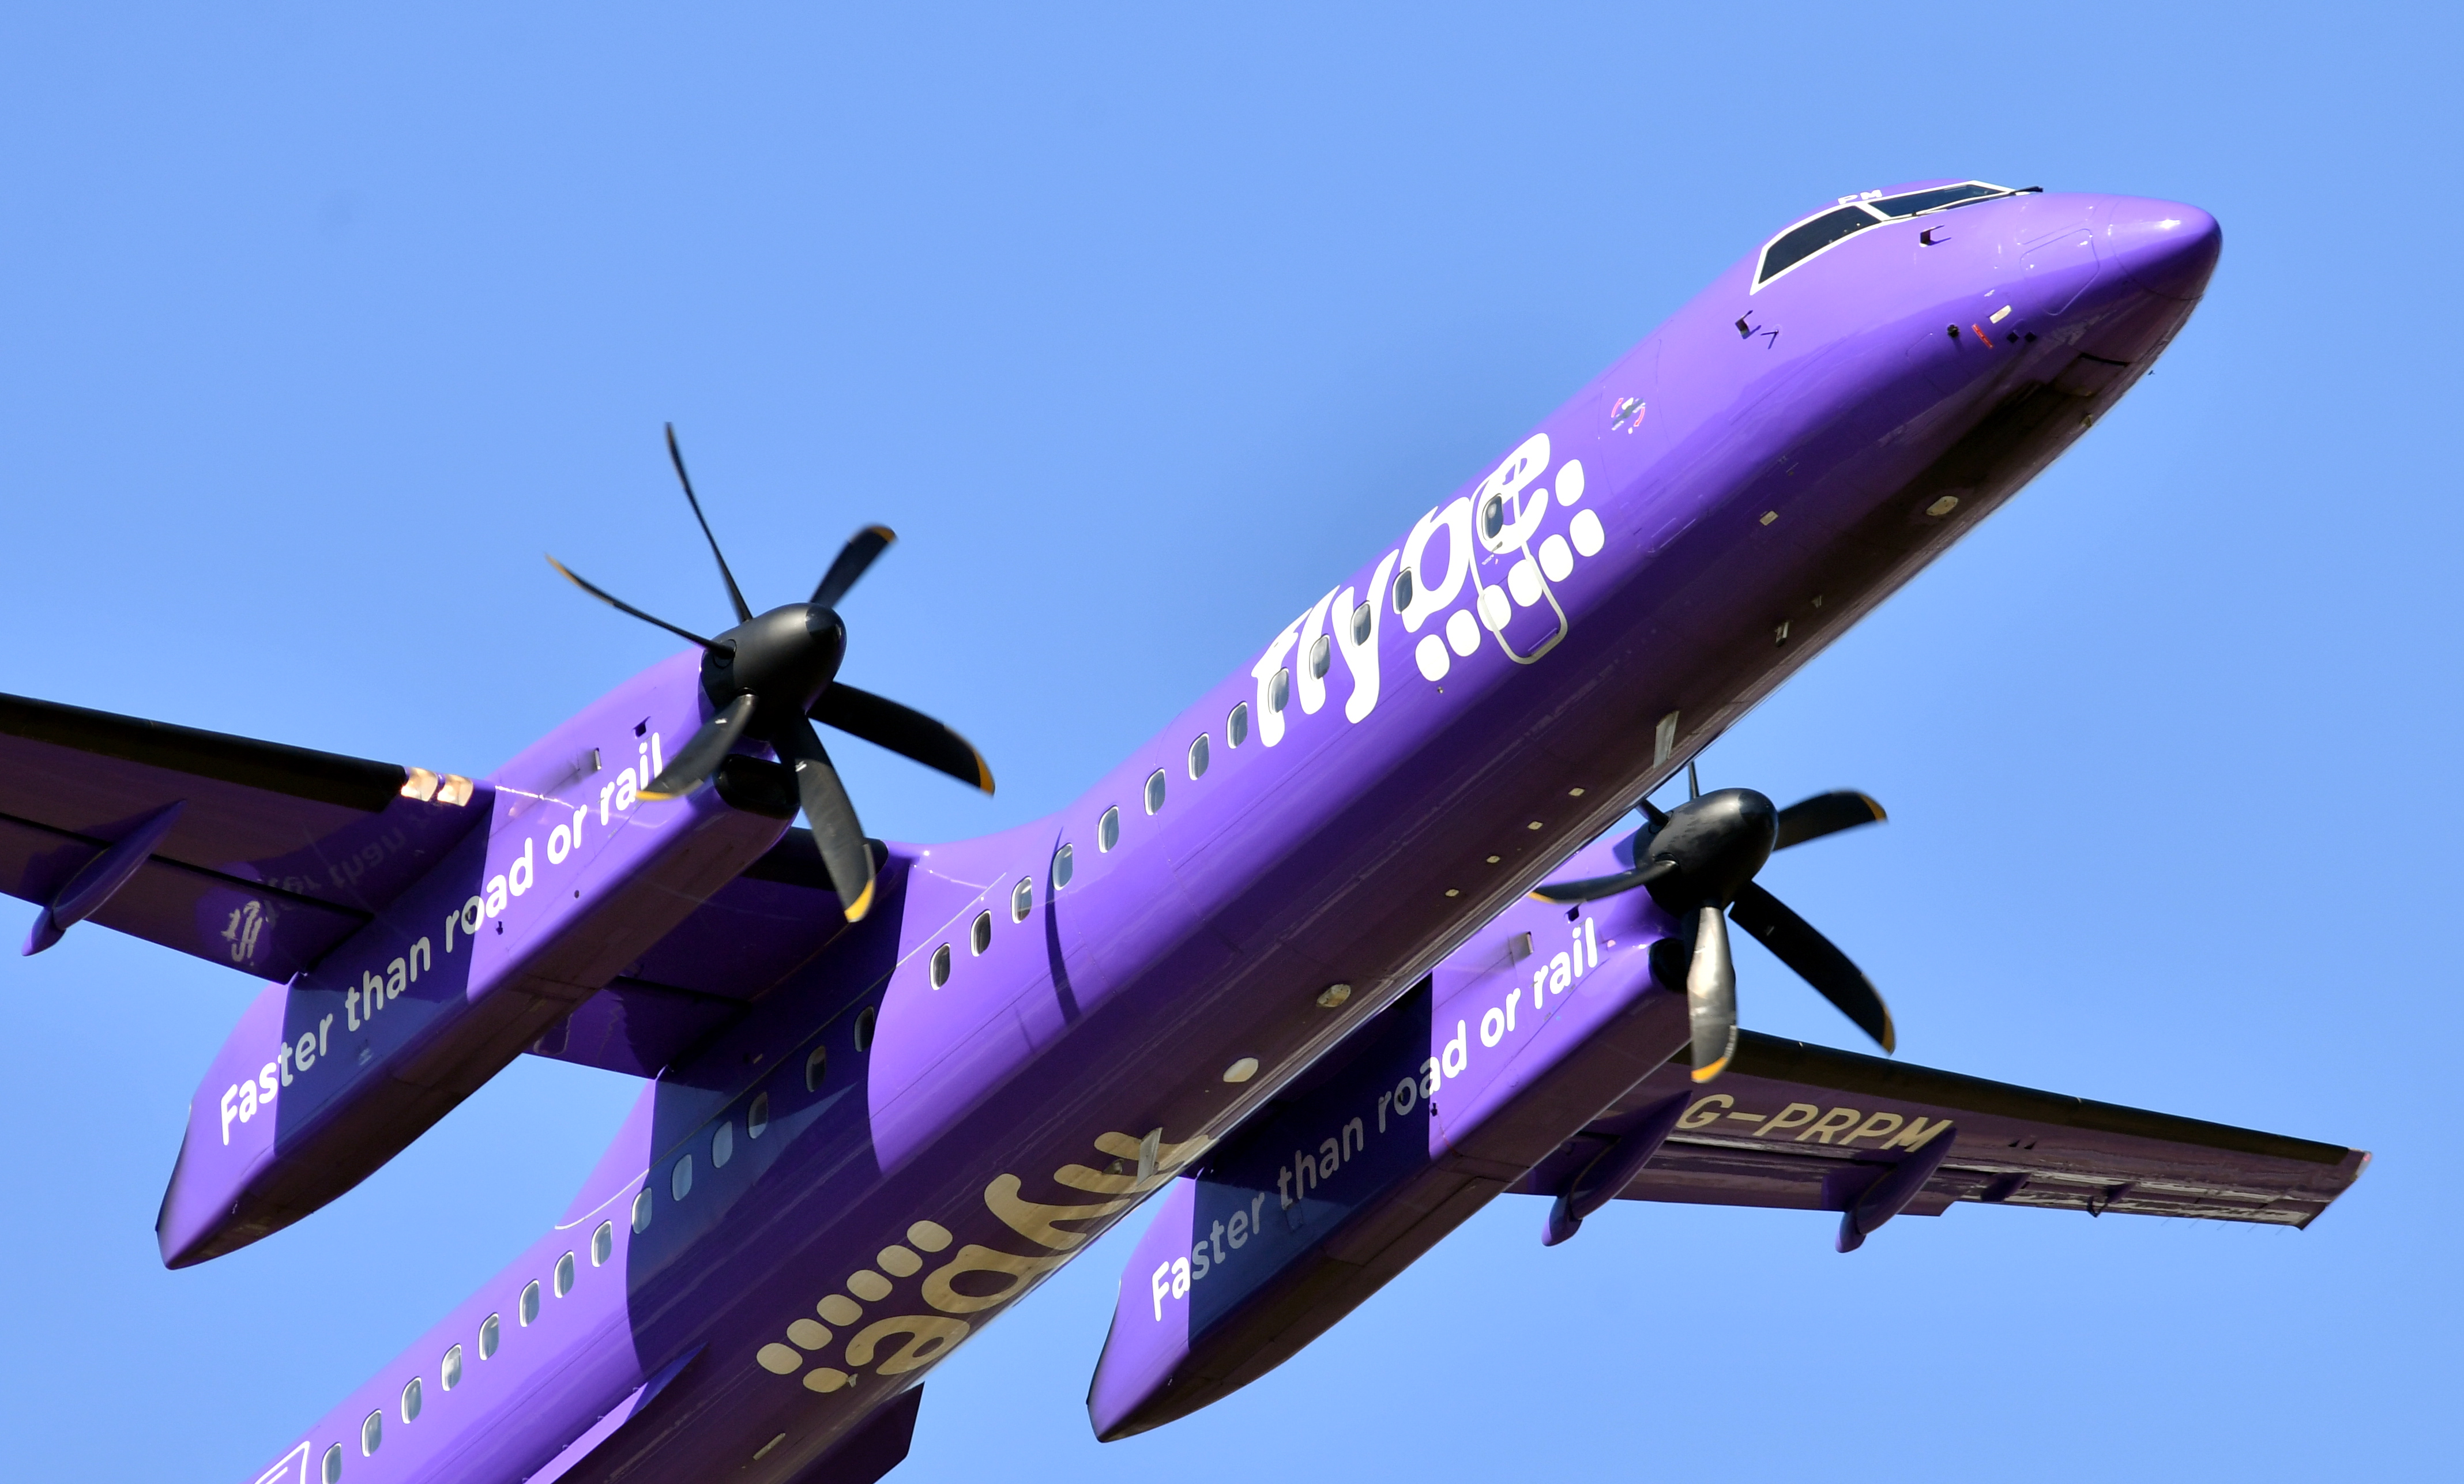 A FlyBe flight takes off from Aberdeen